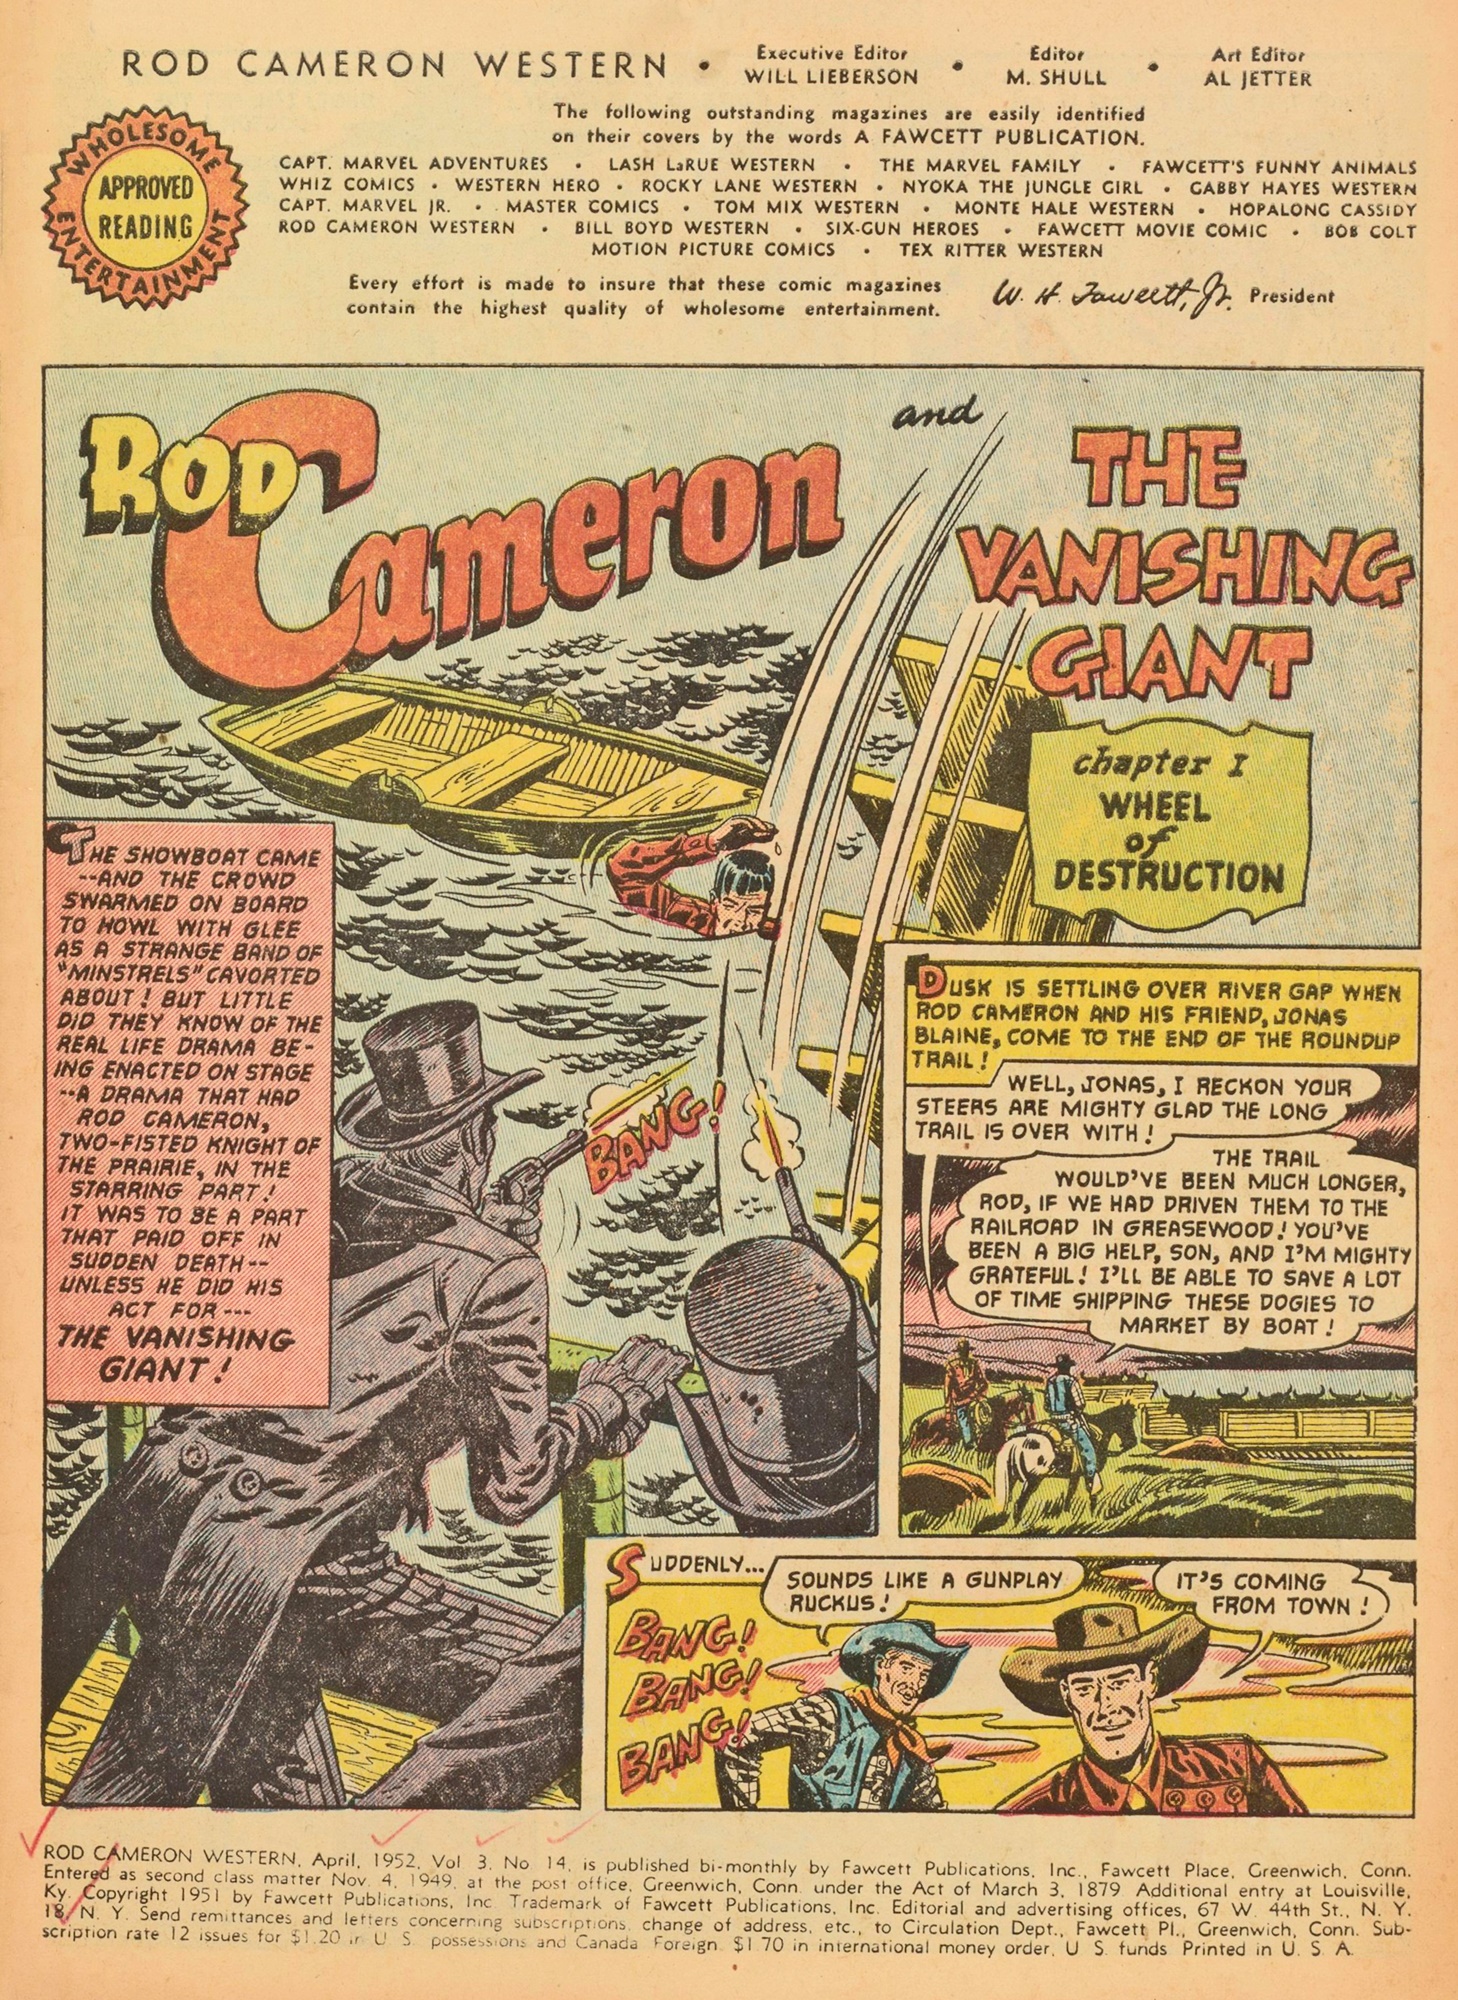 Read online Rod Cameron Western comic -  Issue #14 - 3